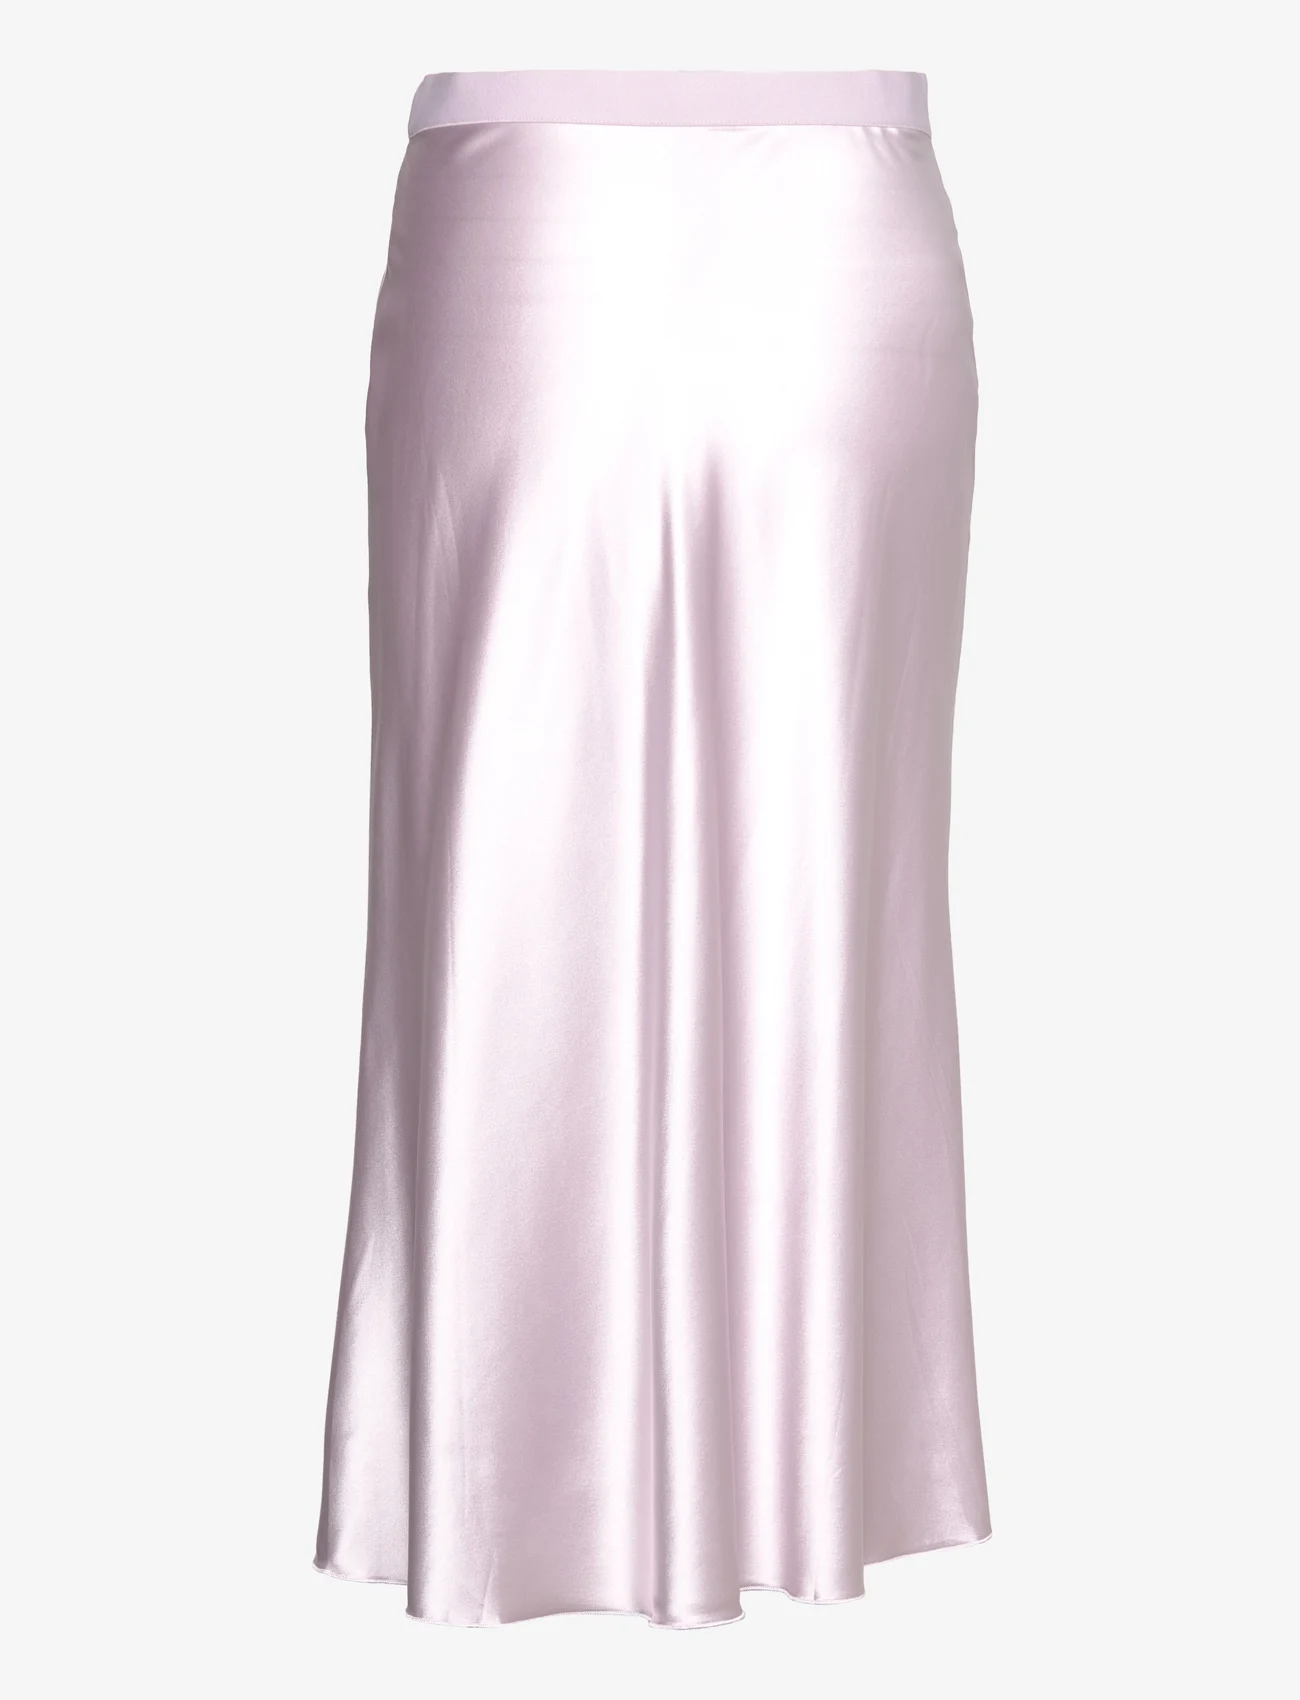 Ahlvar Gallery - Hana satin skirt - party wear at outlet prices - lavender - 1